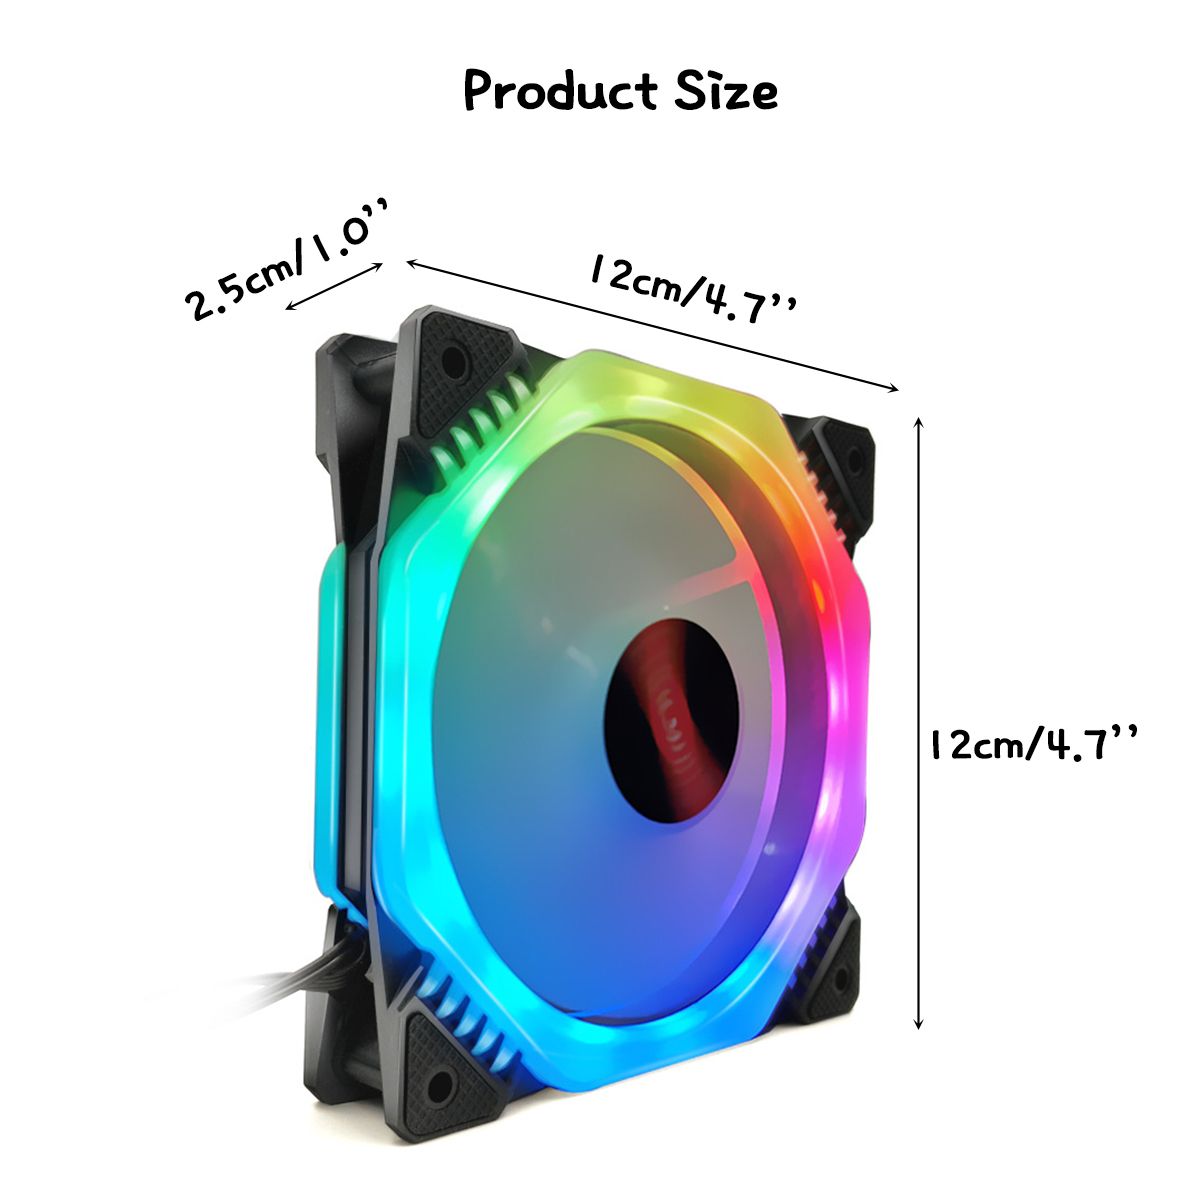 C47346-RGB-PC-Cooling-Fan-1400-RPM-42W-RGB-Symphony-cooling-fan-With-the-Remote-Control-1707240